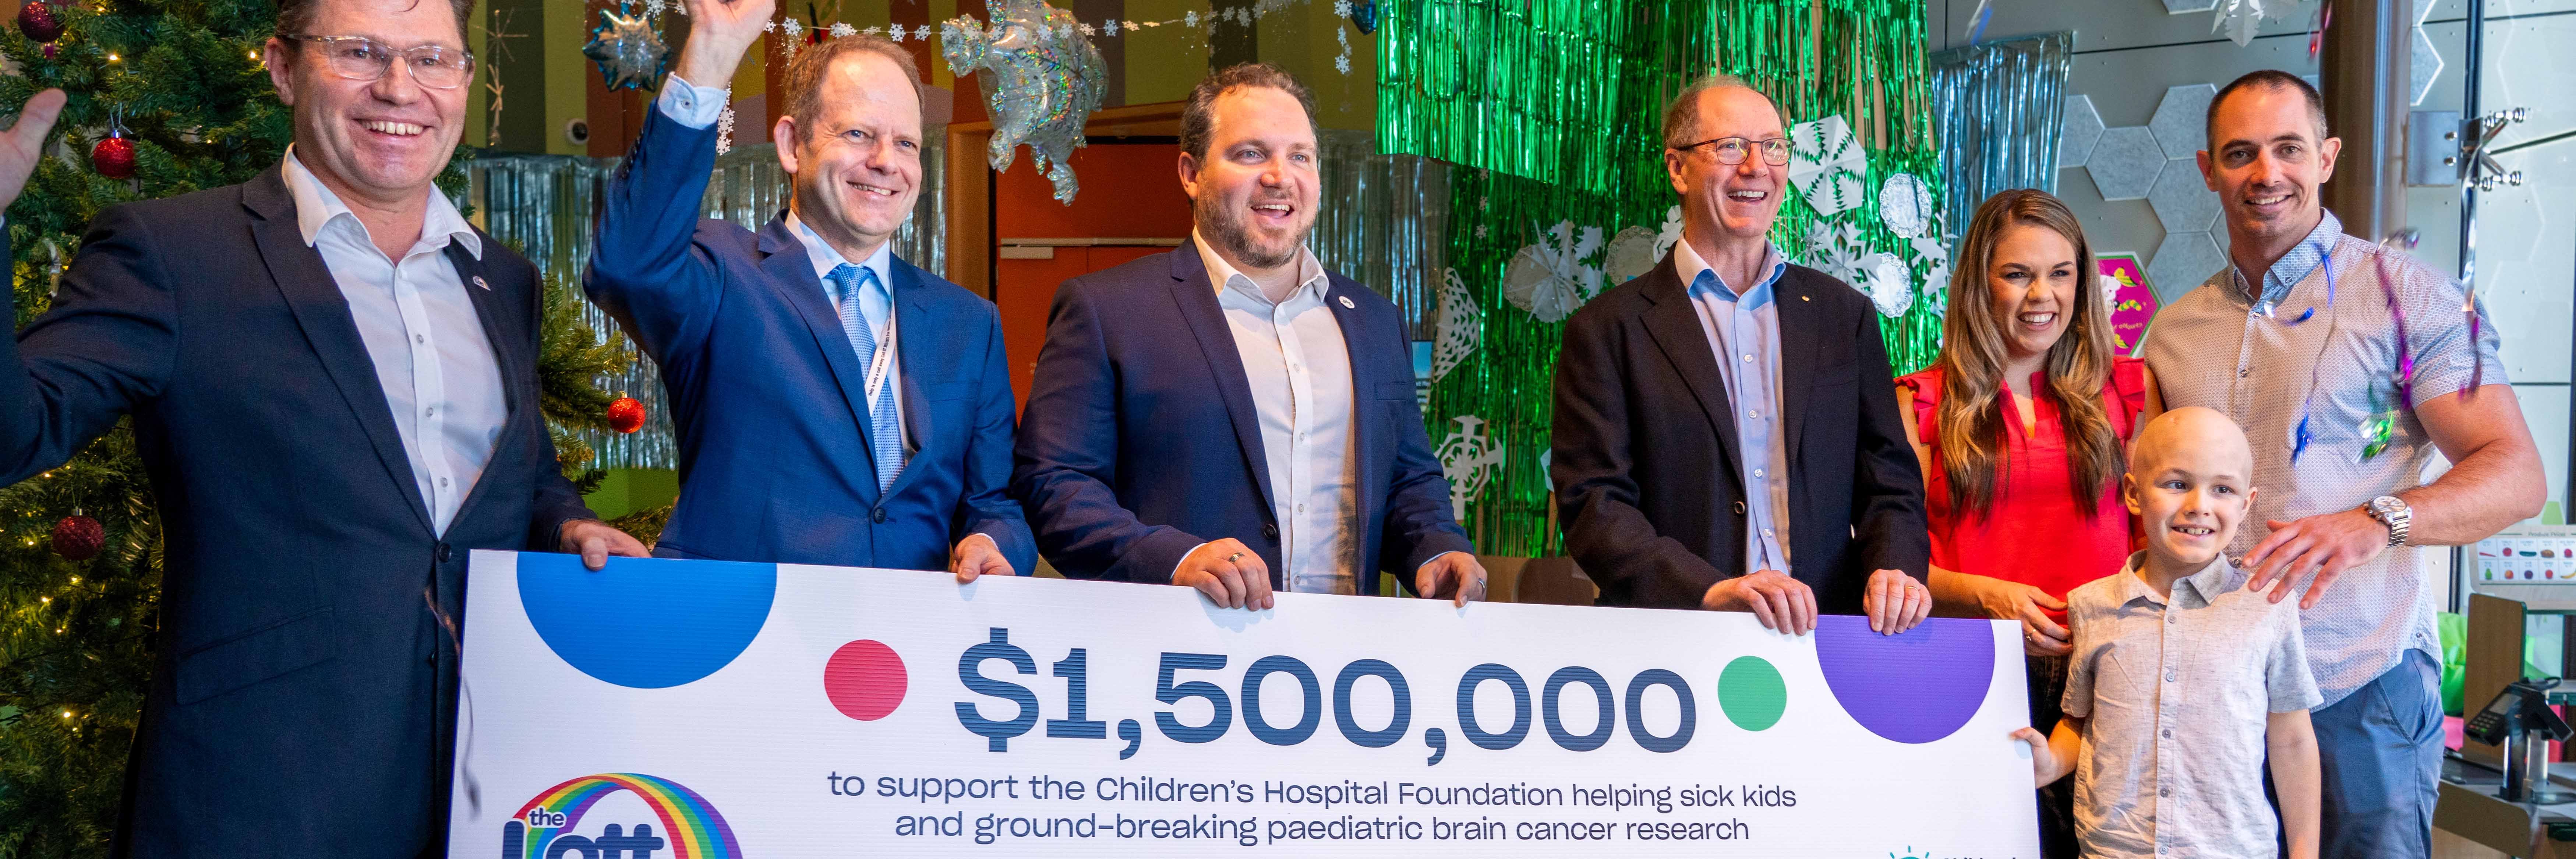 Our $1.5m to support sick children and paediatric brain cancer research  Hero Image